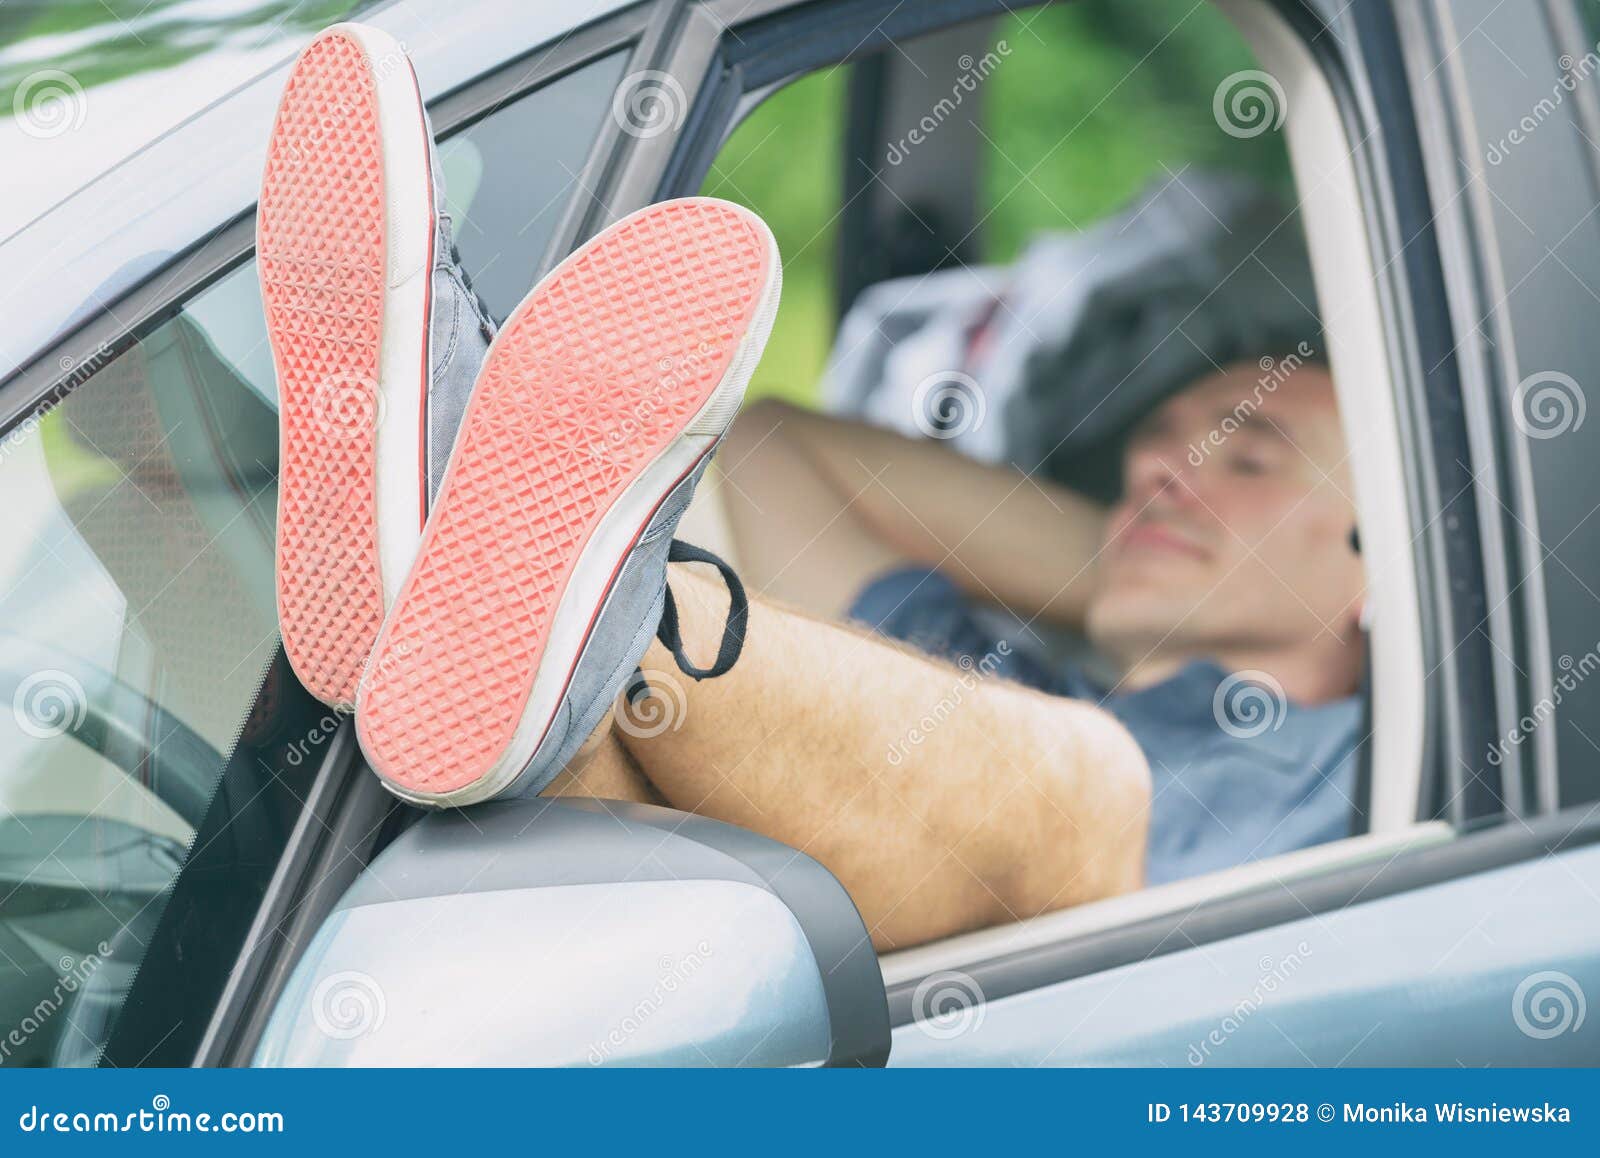 Tired Man Or Driver Sleeping In Car Stock Photo, Picture and Royalty Free  Image. Image 130805192.